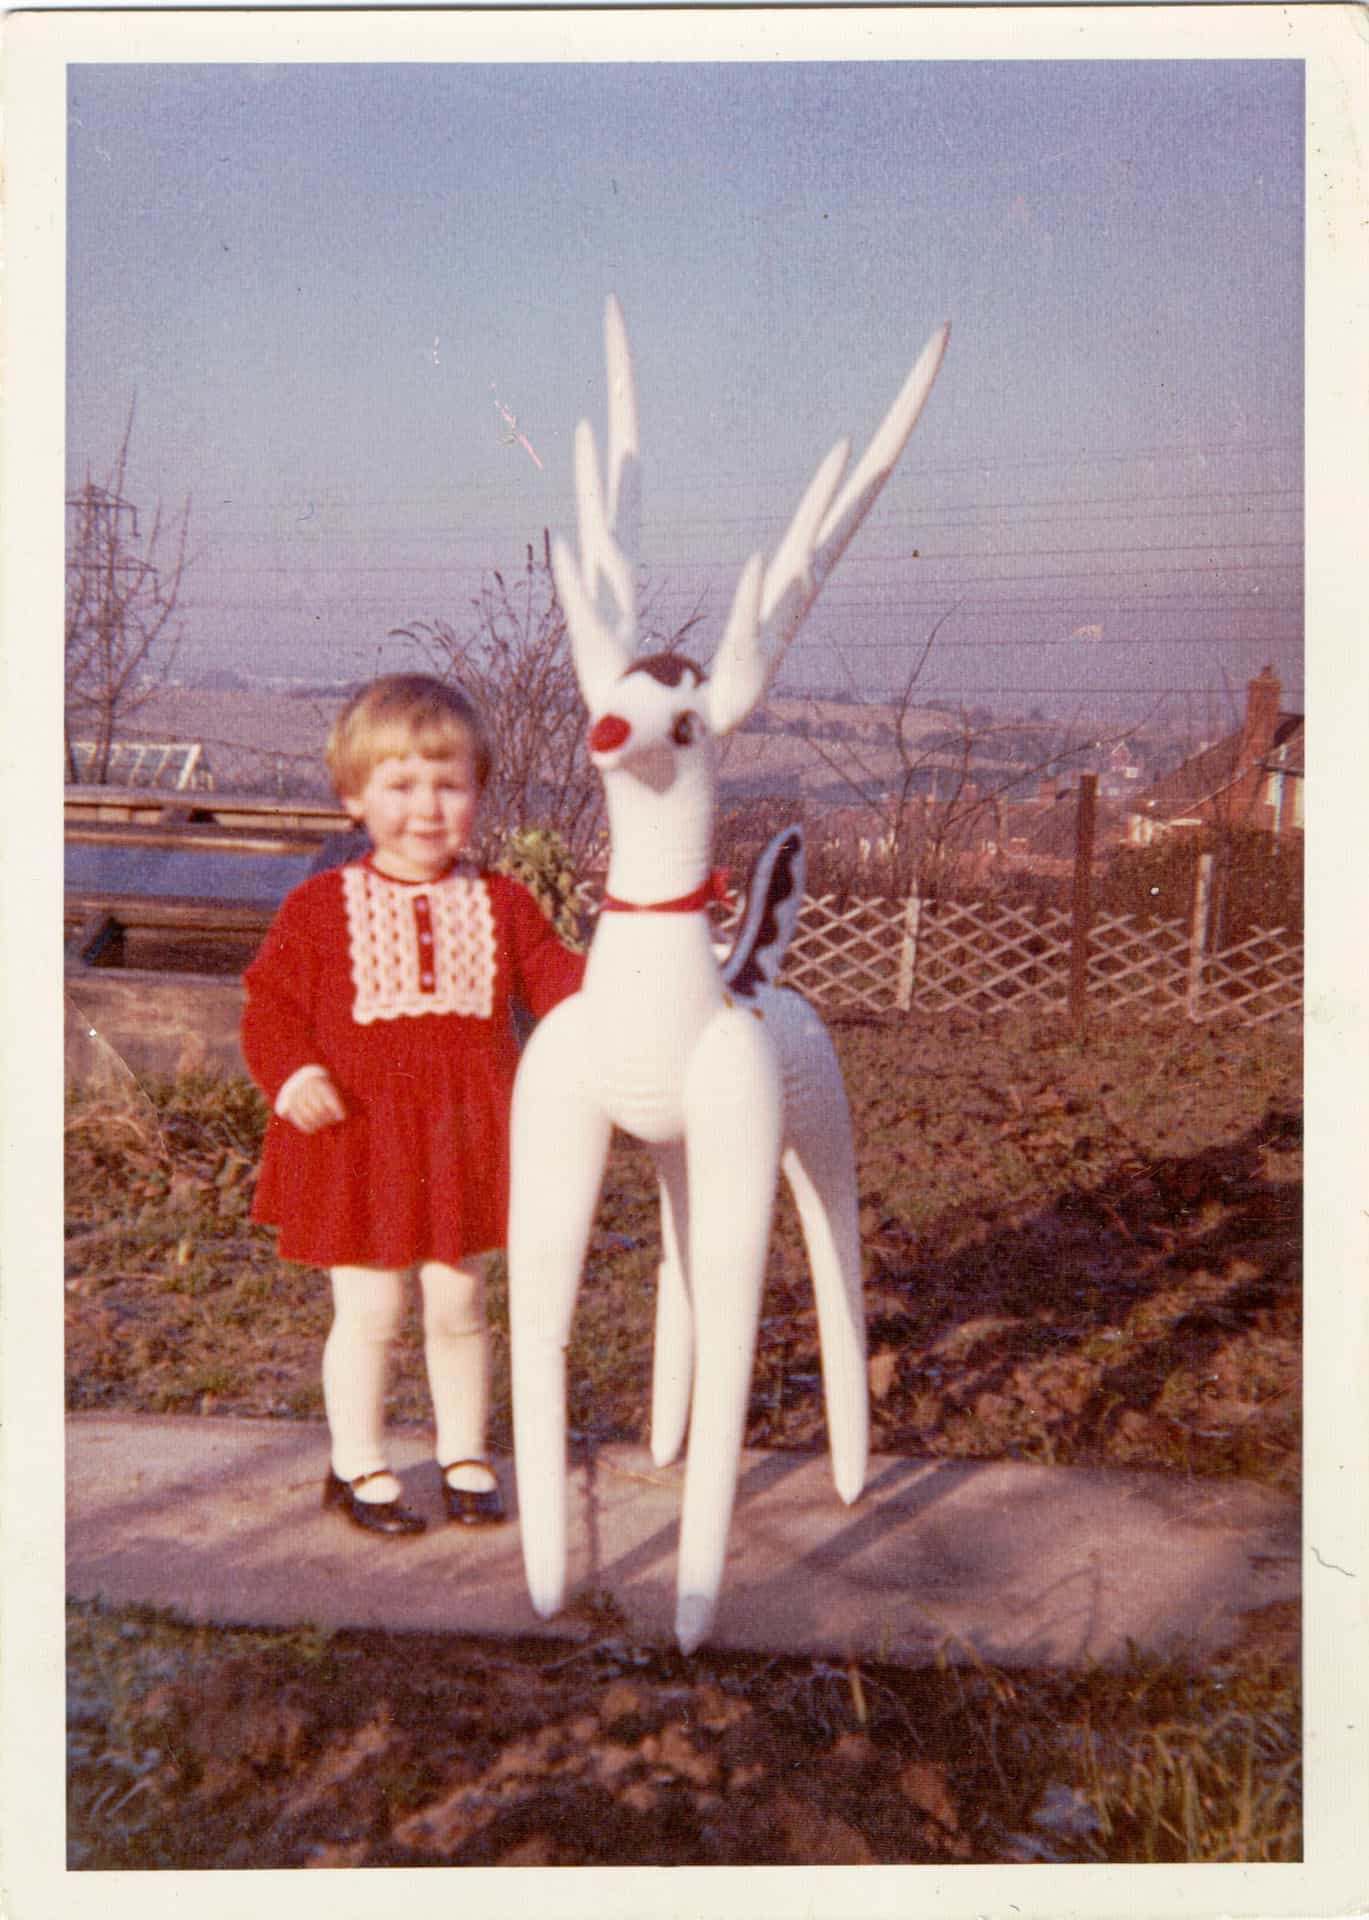 Gaynor Beesley with Rudolph in the garden of the family home in Ettingshall Park, Wolverhampton, Christmas Day, 1966